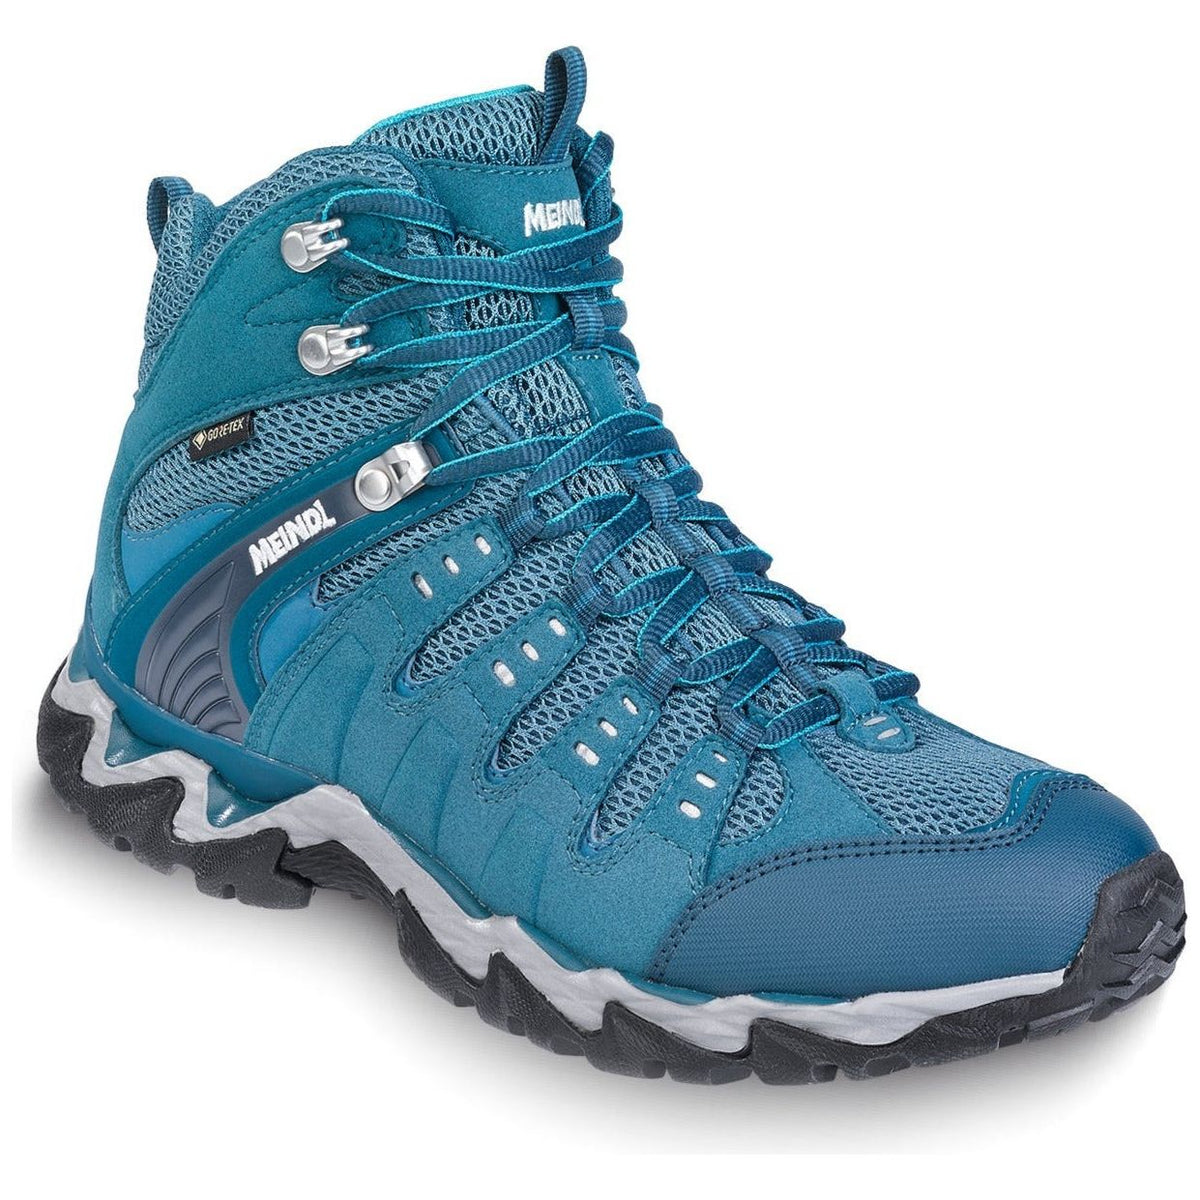 Meindl Respond Lady Mid II GTX Walking Boots - Petrol/Turquoise